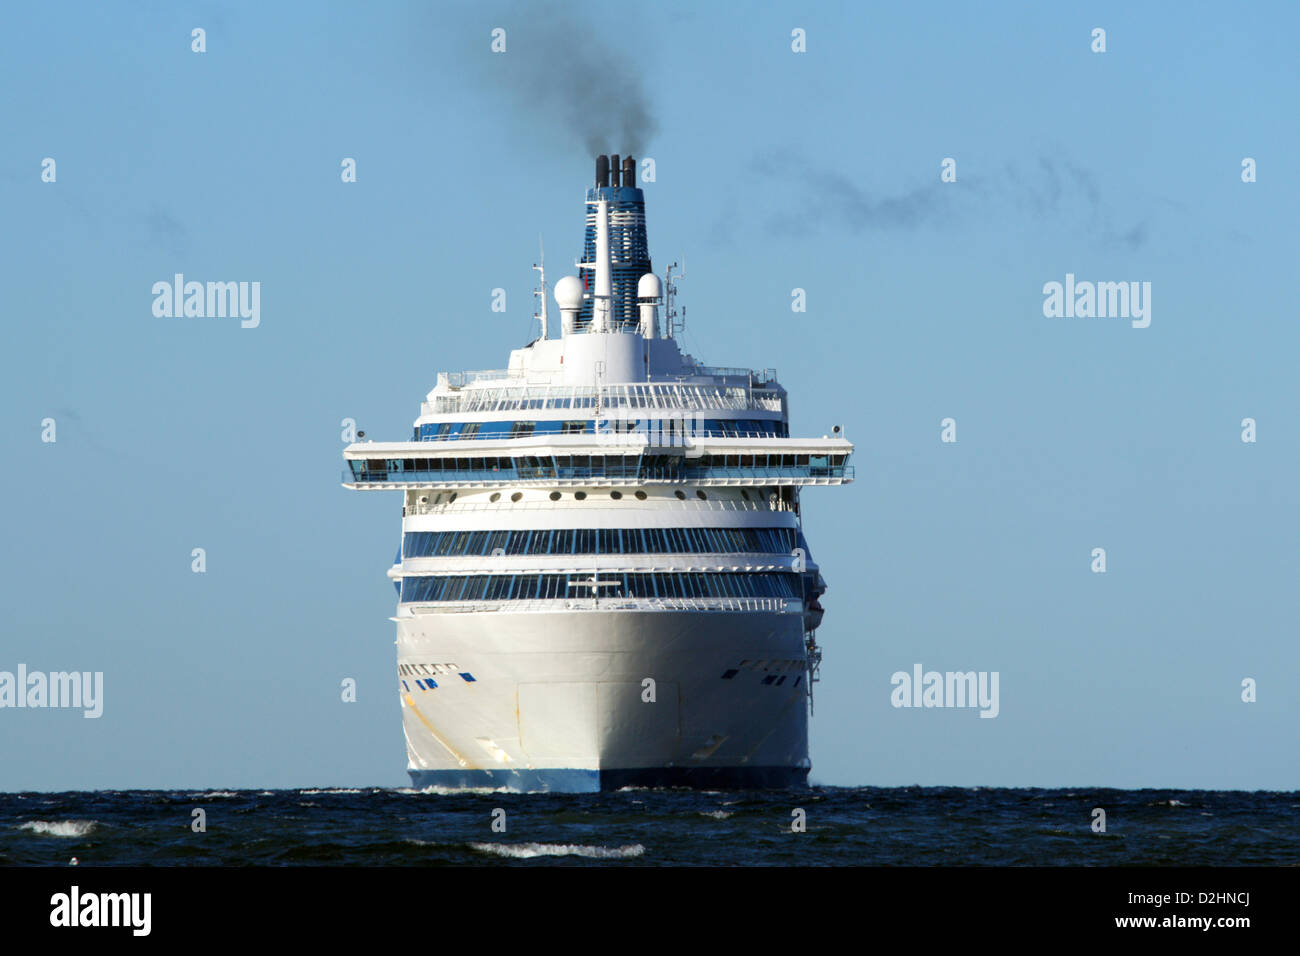 Passenger ferry on a background of the blue sky Stock Photo